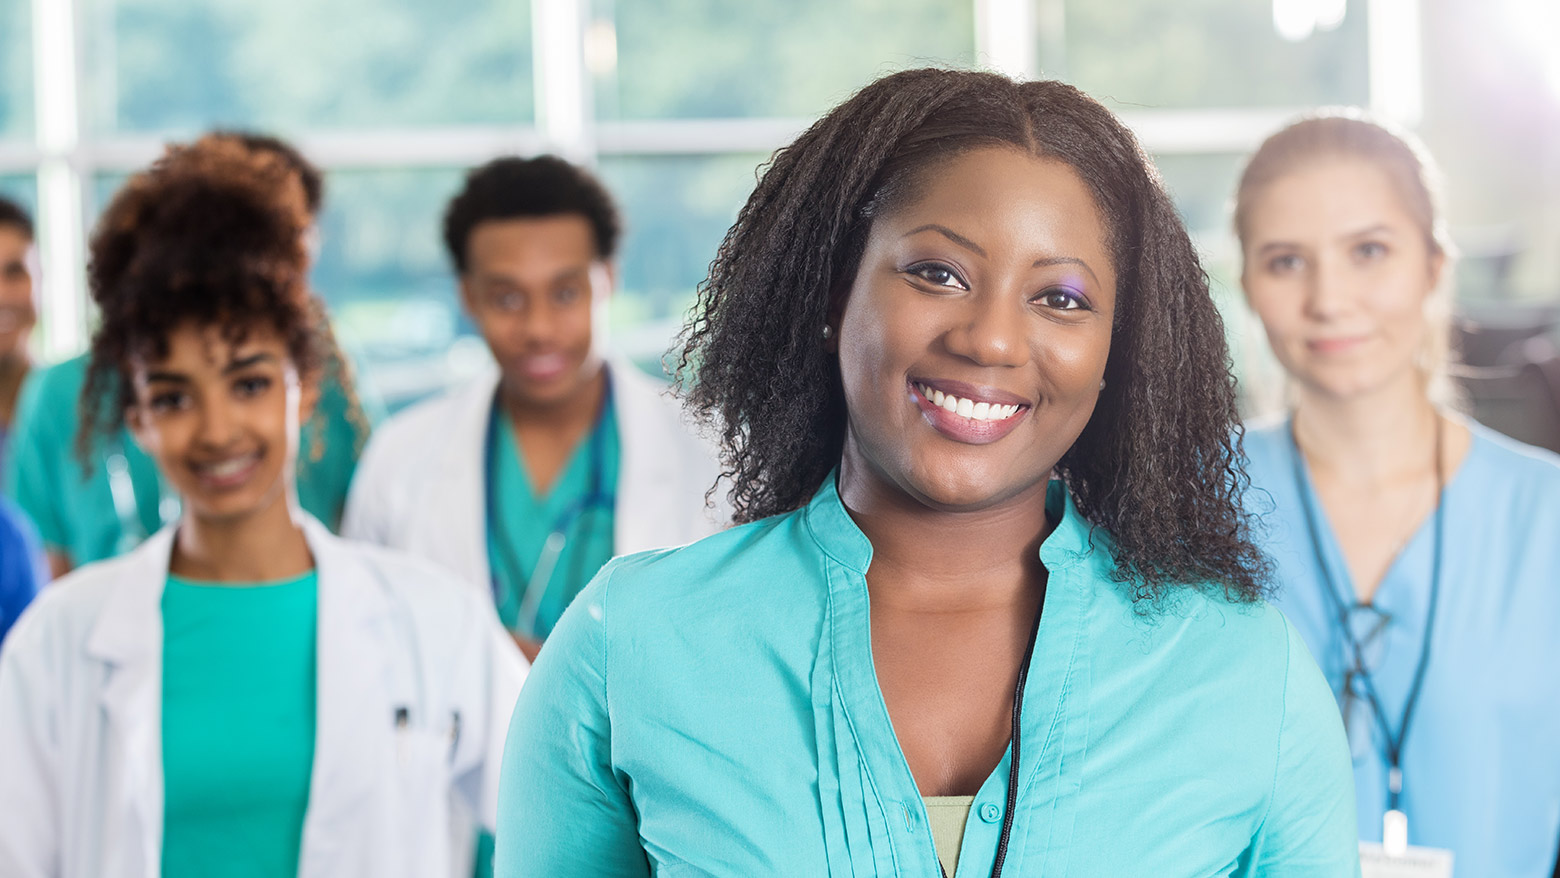 A woman smiling at the camera with co-workers standing behind her in scrubs. 